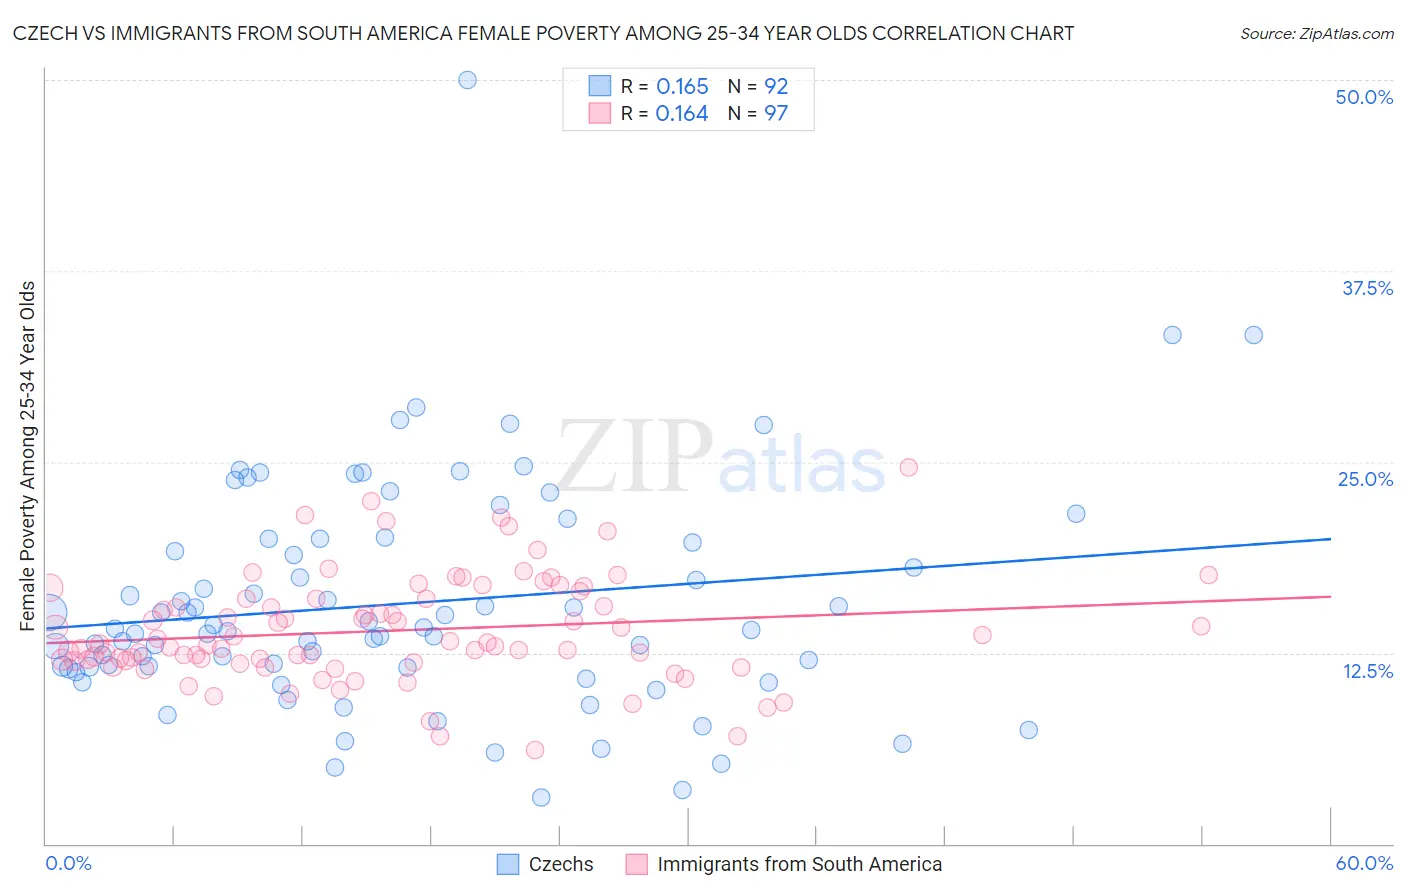 Czech vs Immigrants from South America Female Poverty Among 25-34 Year Olds